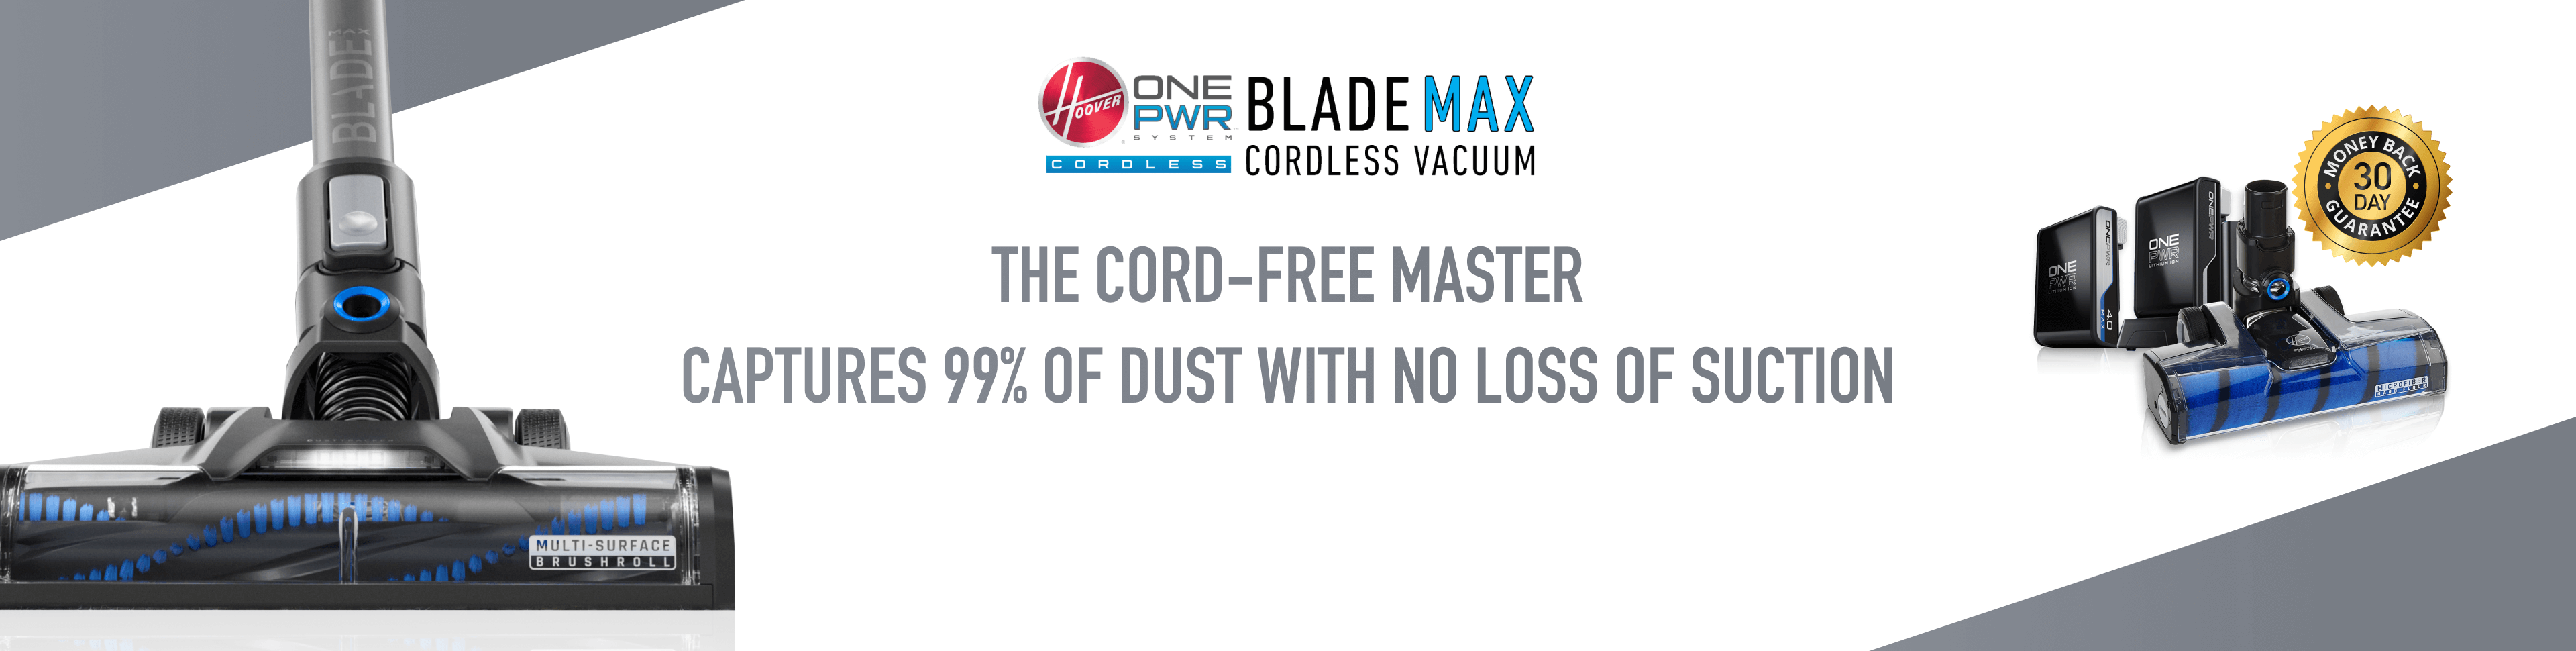 Hoover ONEPWR™ Blade MAX Cordless Vacuum